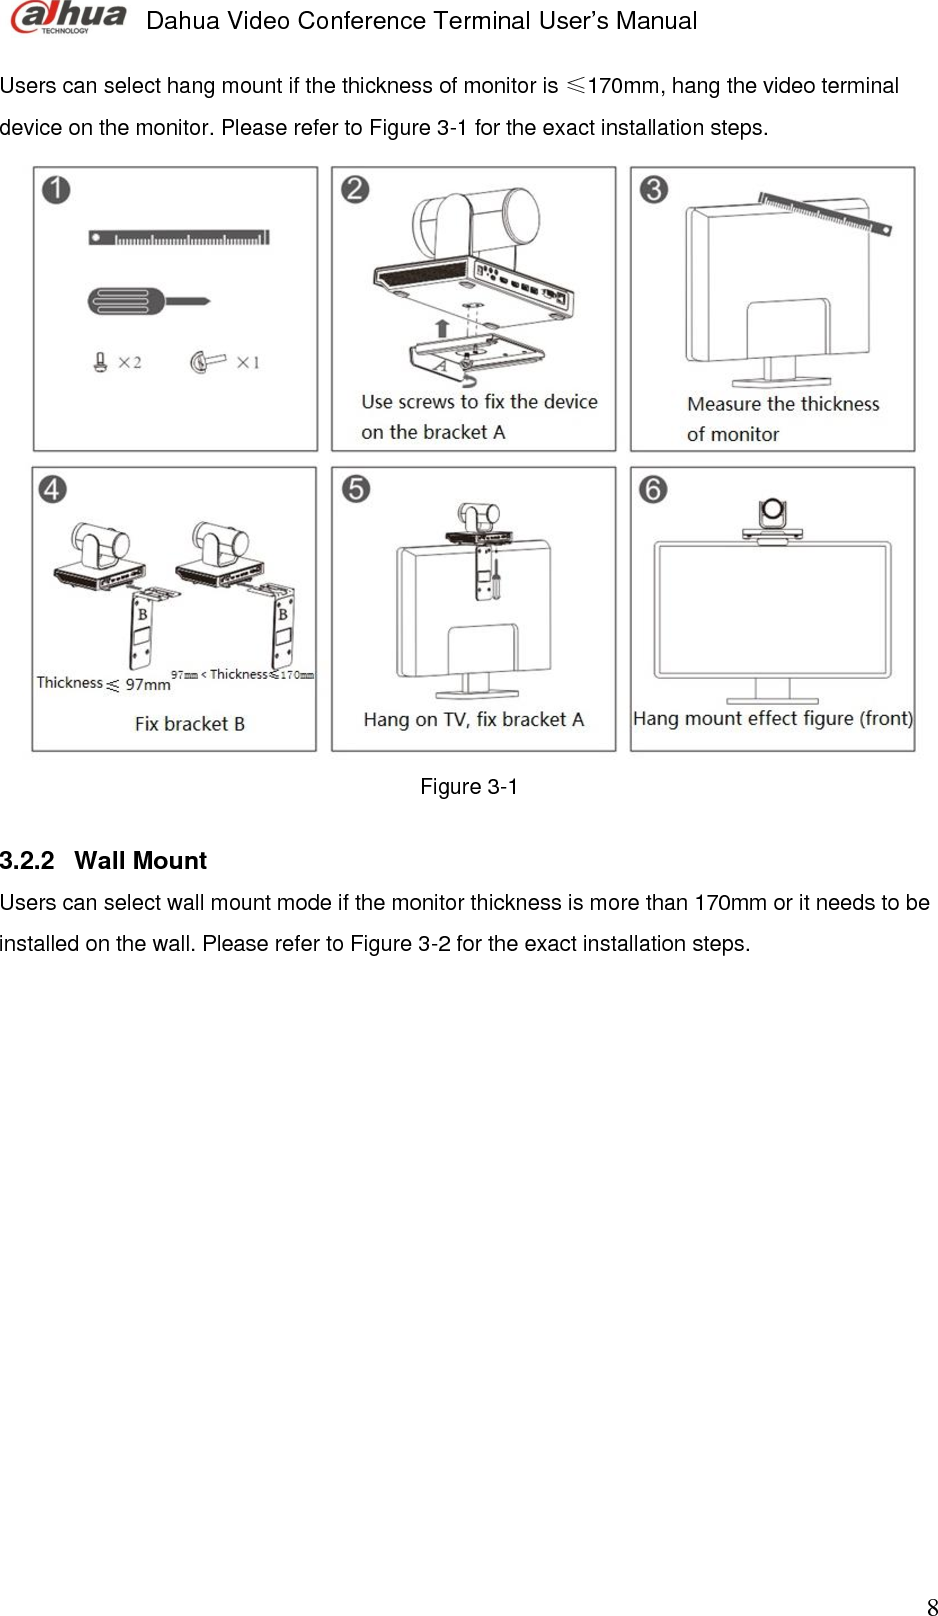  Dahua Video Conference Terminal User’s Manual                                                                              8 Users can select hang mount if the thickness of monitor is ≤170mm, hang the video terminal device on the monitor. Please refer to Figure 3-1 for the exact installation steps.  Figure 3-1  3.2.2  Wall Mount Users can select wall mount mode if the monitor thickness is more than 170mm or it needs to be installed on the wall. Please refer to Figure 3-2 for the exact installation steps.            